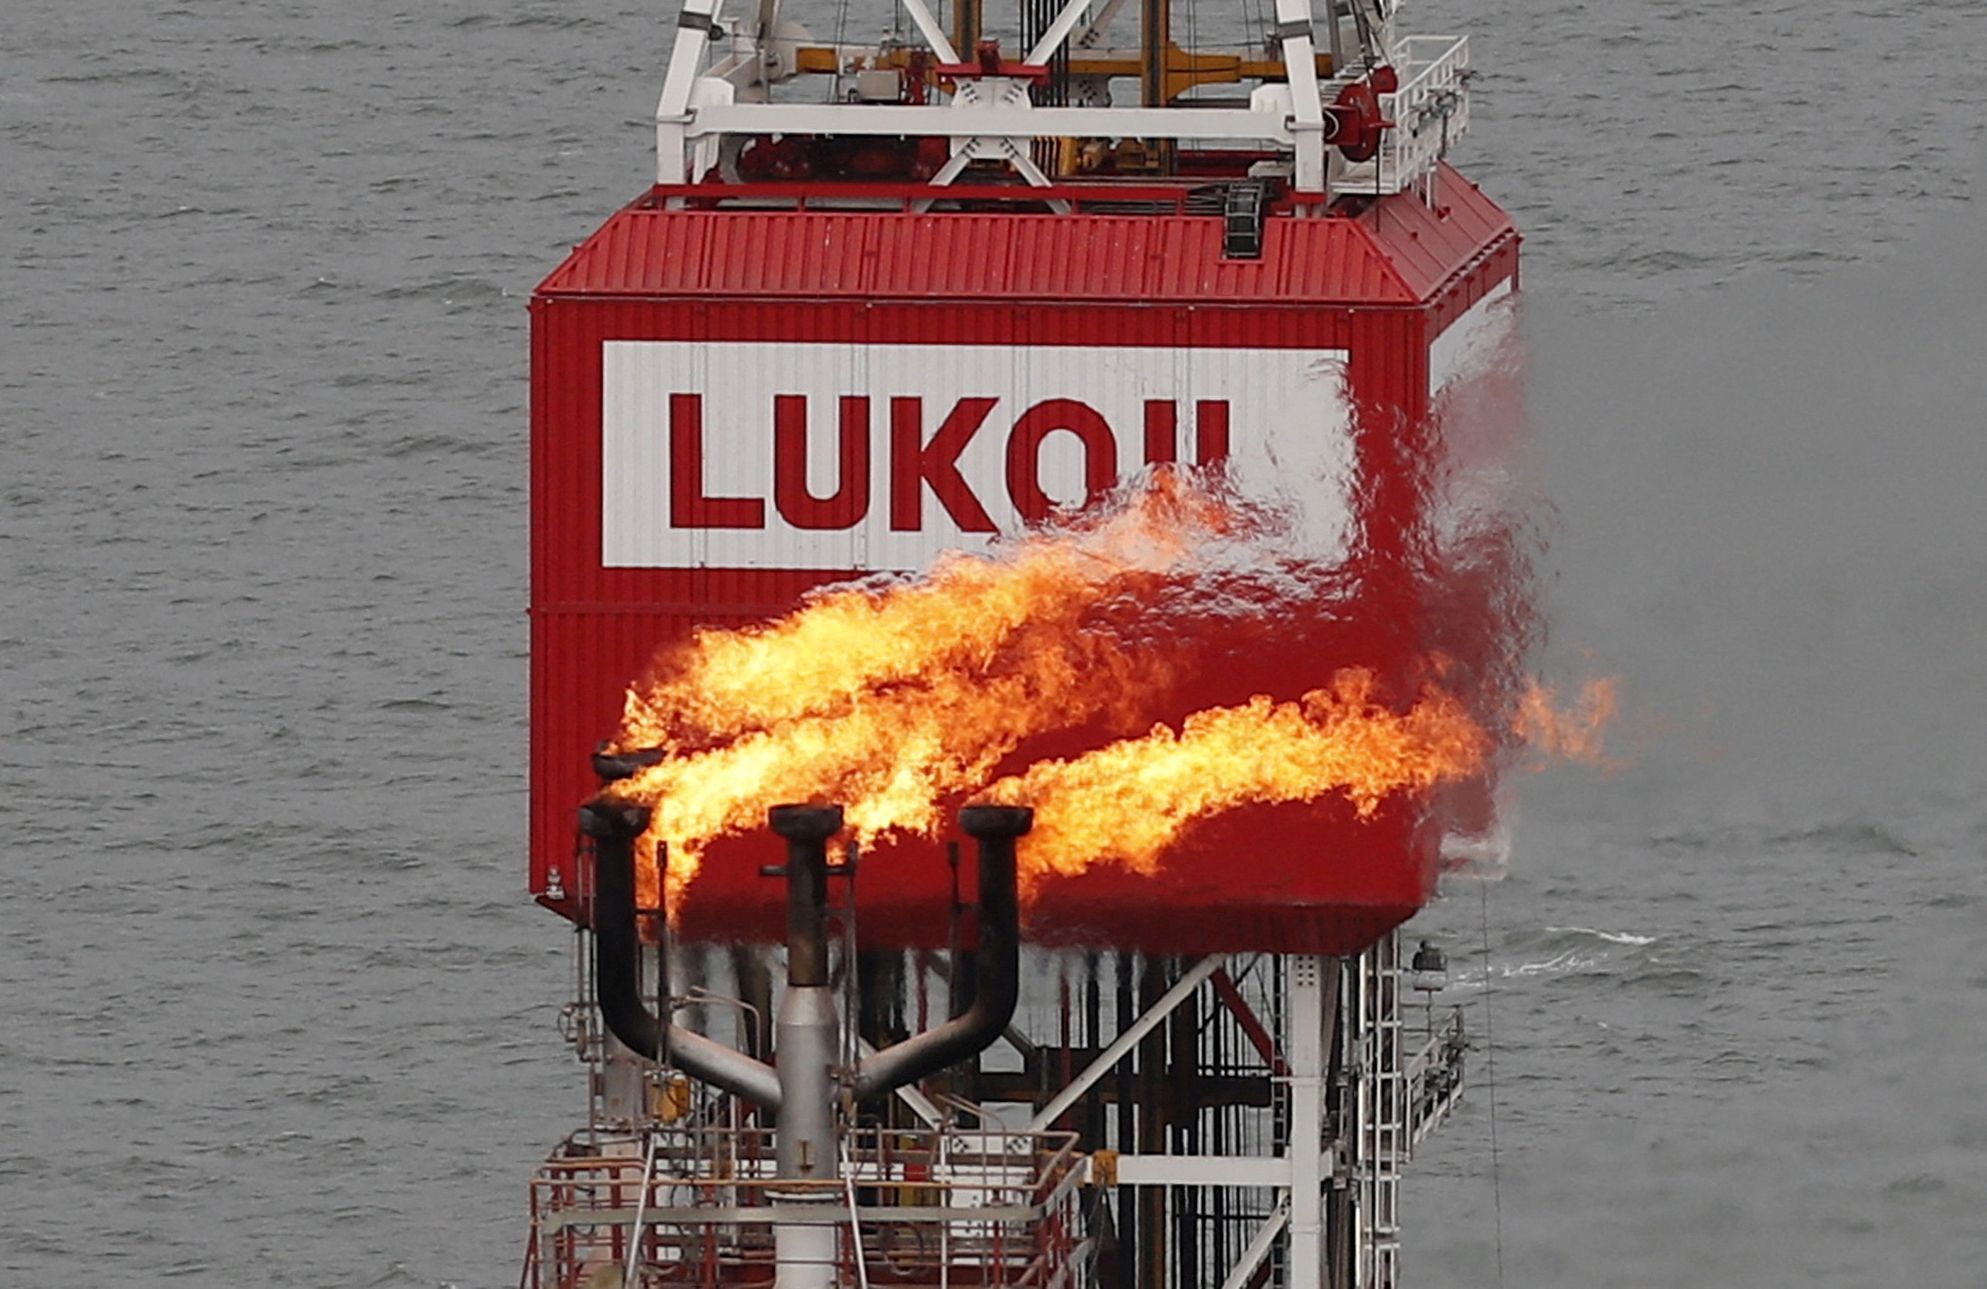 FILE PHOTO: A gas torch is seen next to the Lukoil company sign at the Filanovskogo oil platform in the Caspian Sea